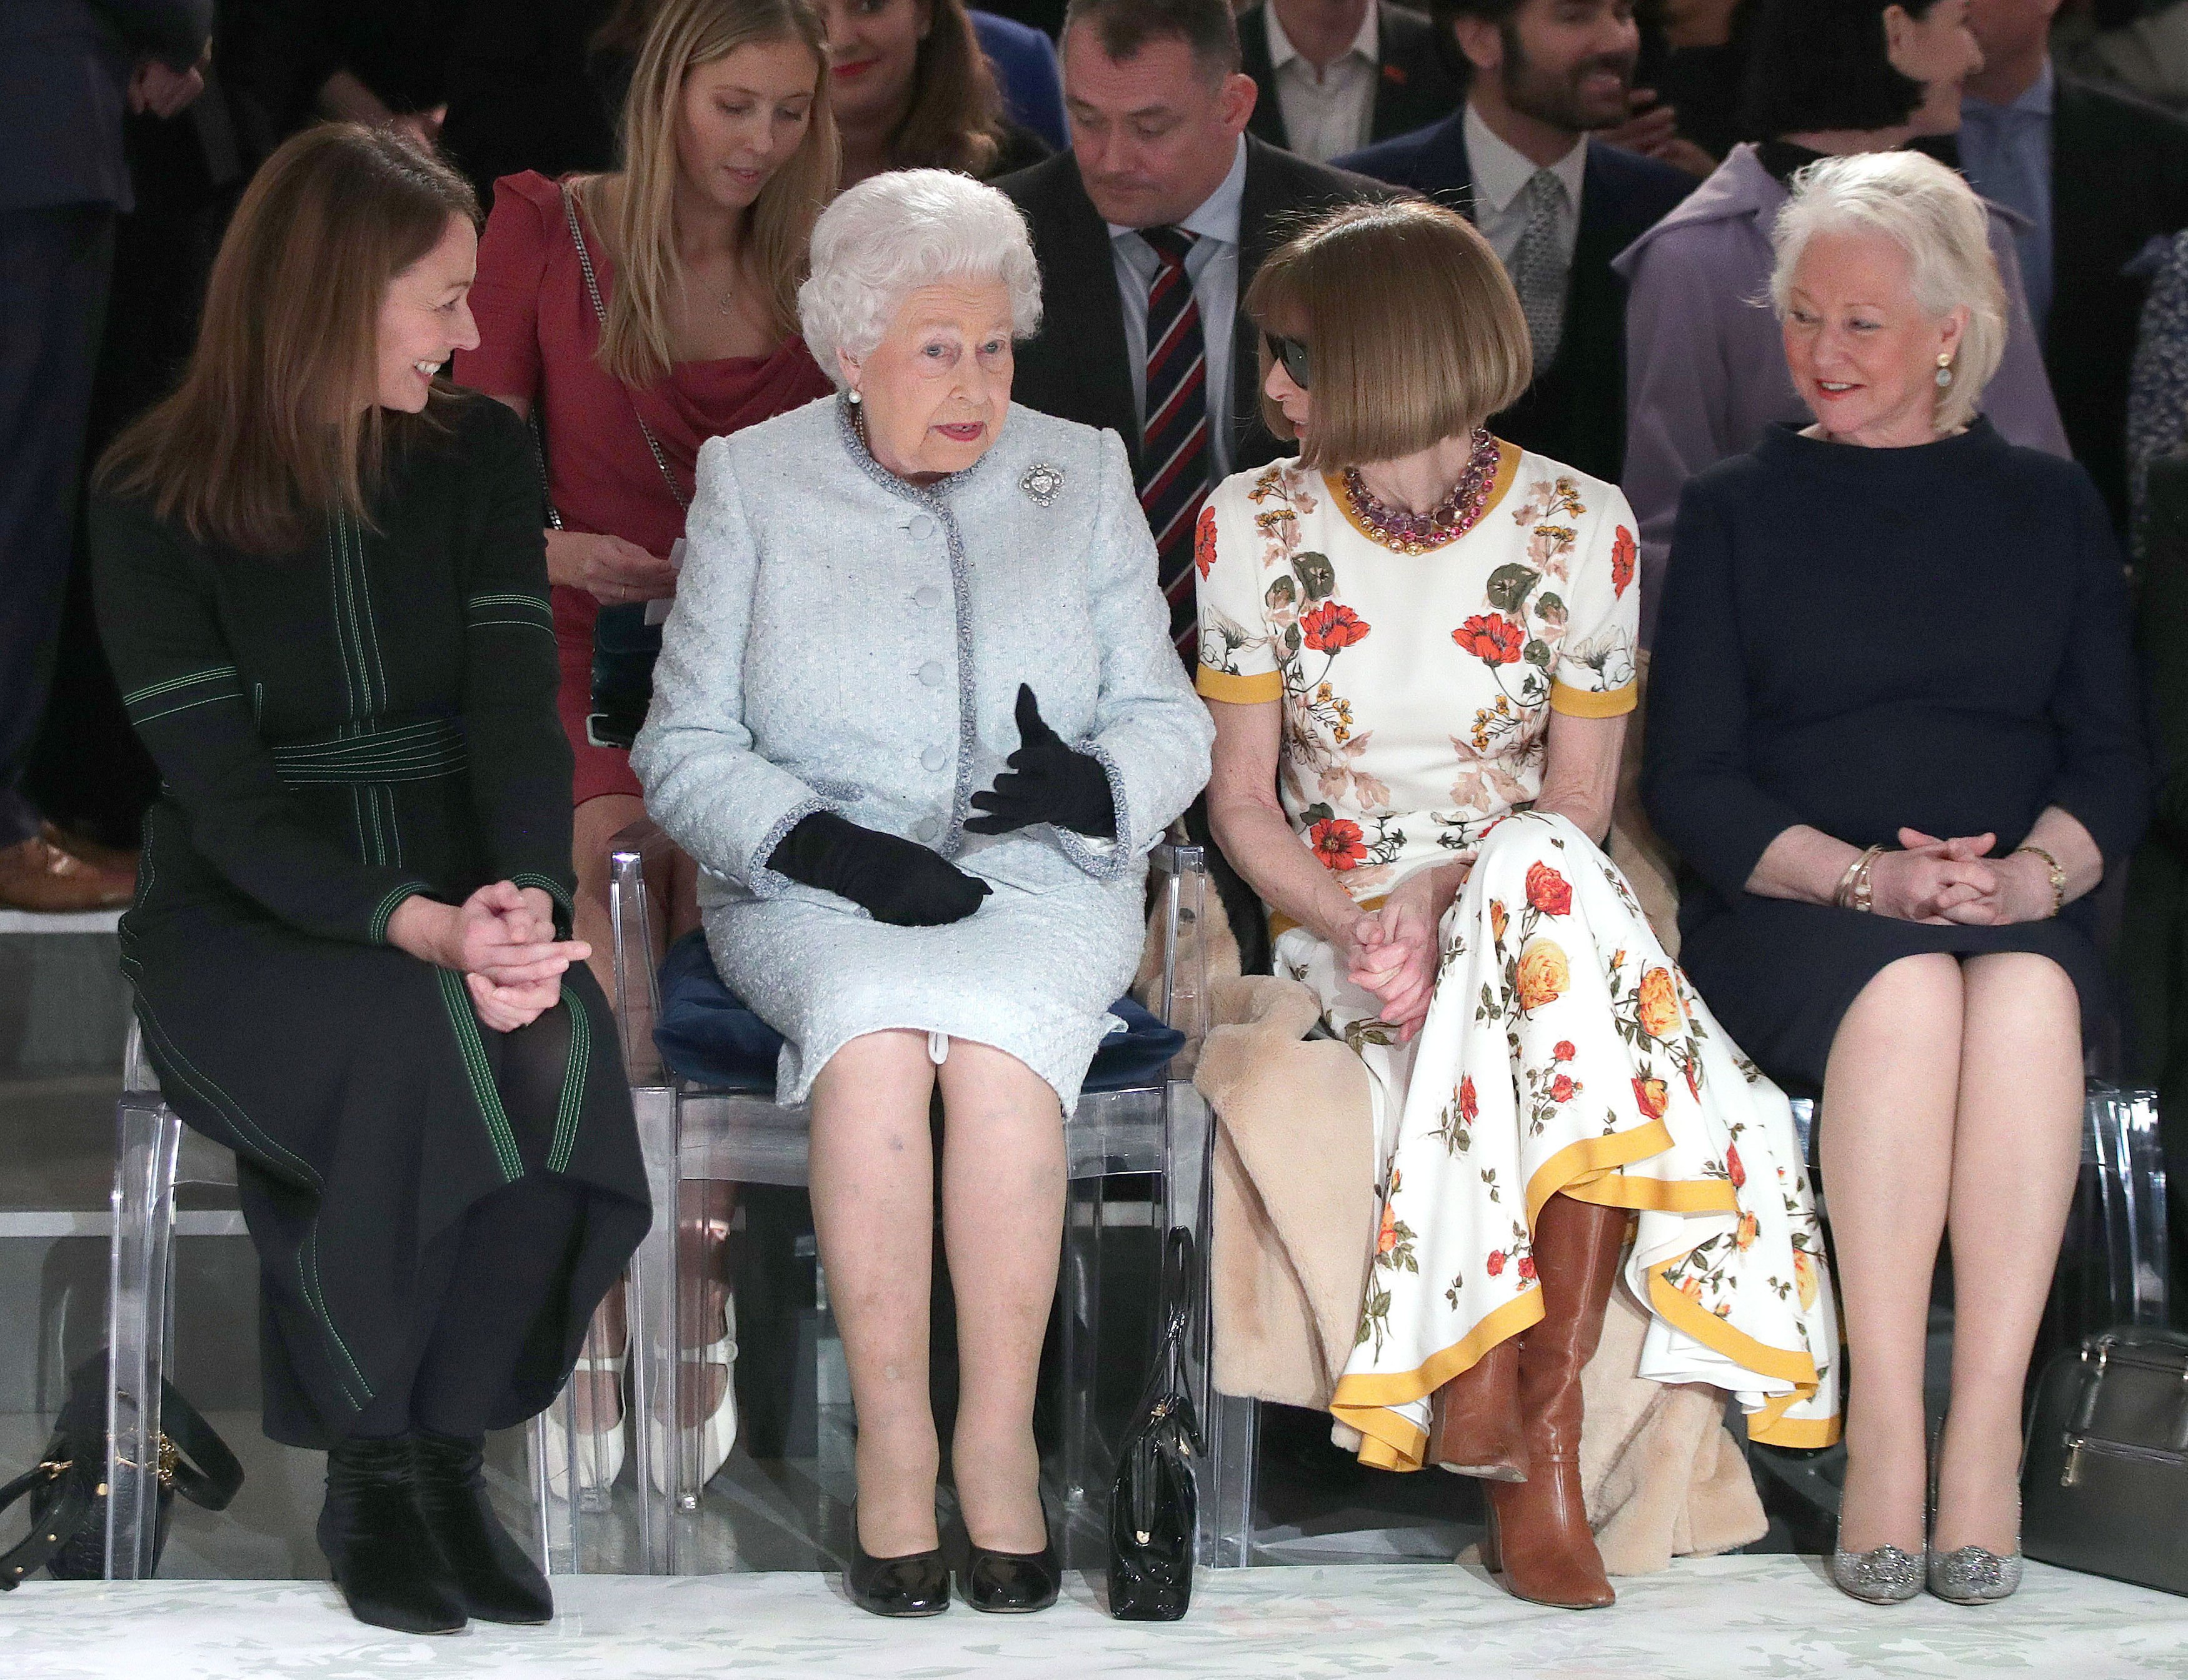 Queen Elizabeth II sitting with Anna Wintour, Caroline Rush (L), chief executive of the British Fashion Council (BFC) and royal dressmaker Angela Kelly (R) as they view Richard Quinn's runway show during London Fashion Week's BFC Show Space on February 20, 2018 in London, United Kingdom | Source: Getty Images